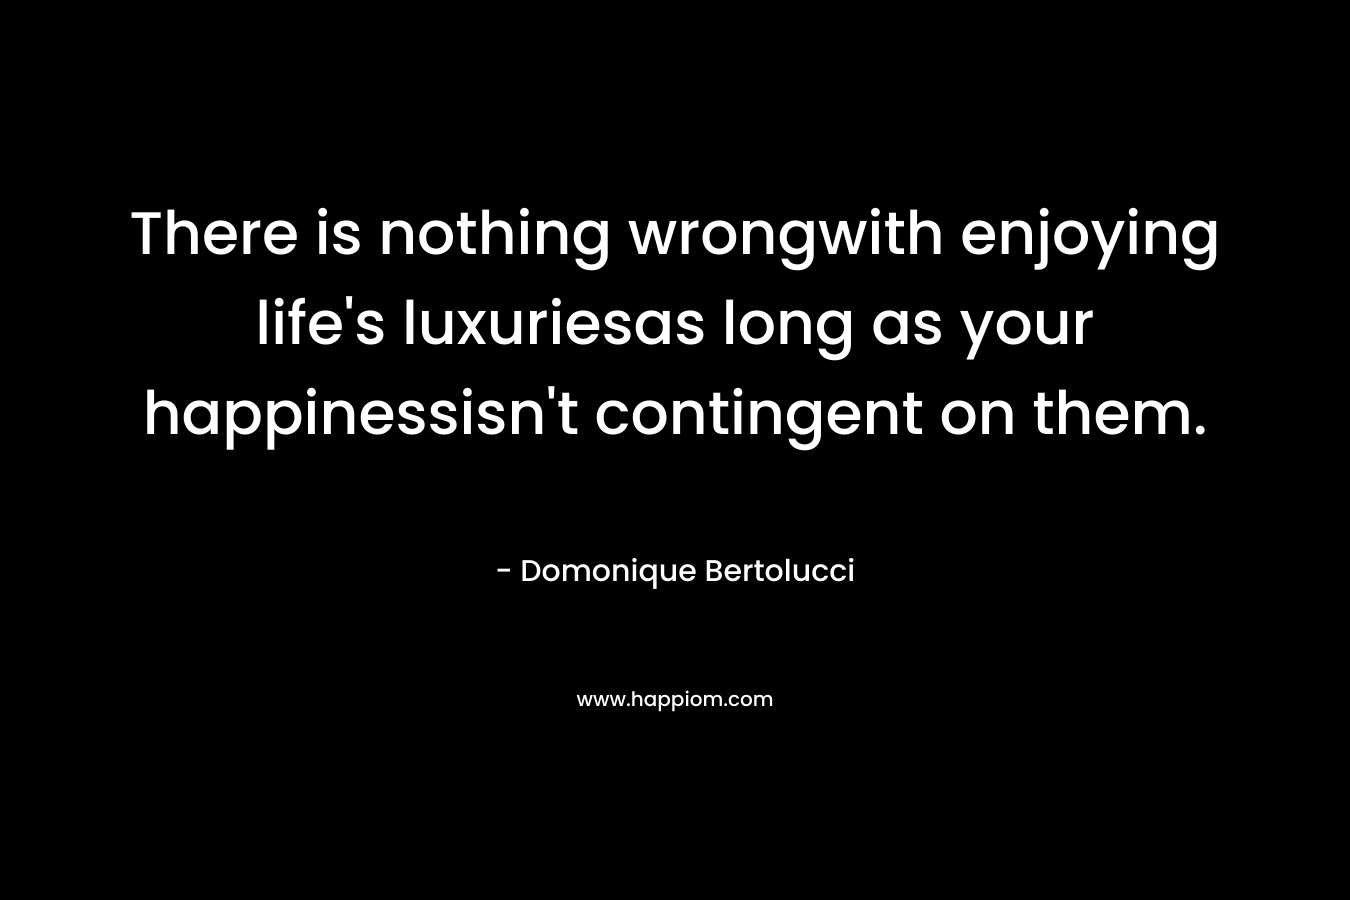 There is nothing wrongwith enjoying life’s luxuriesas long as your happinessisn’t contingent on them. – Domonique Bertolucci